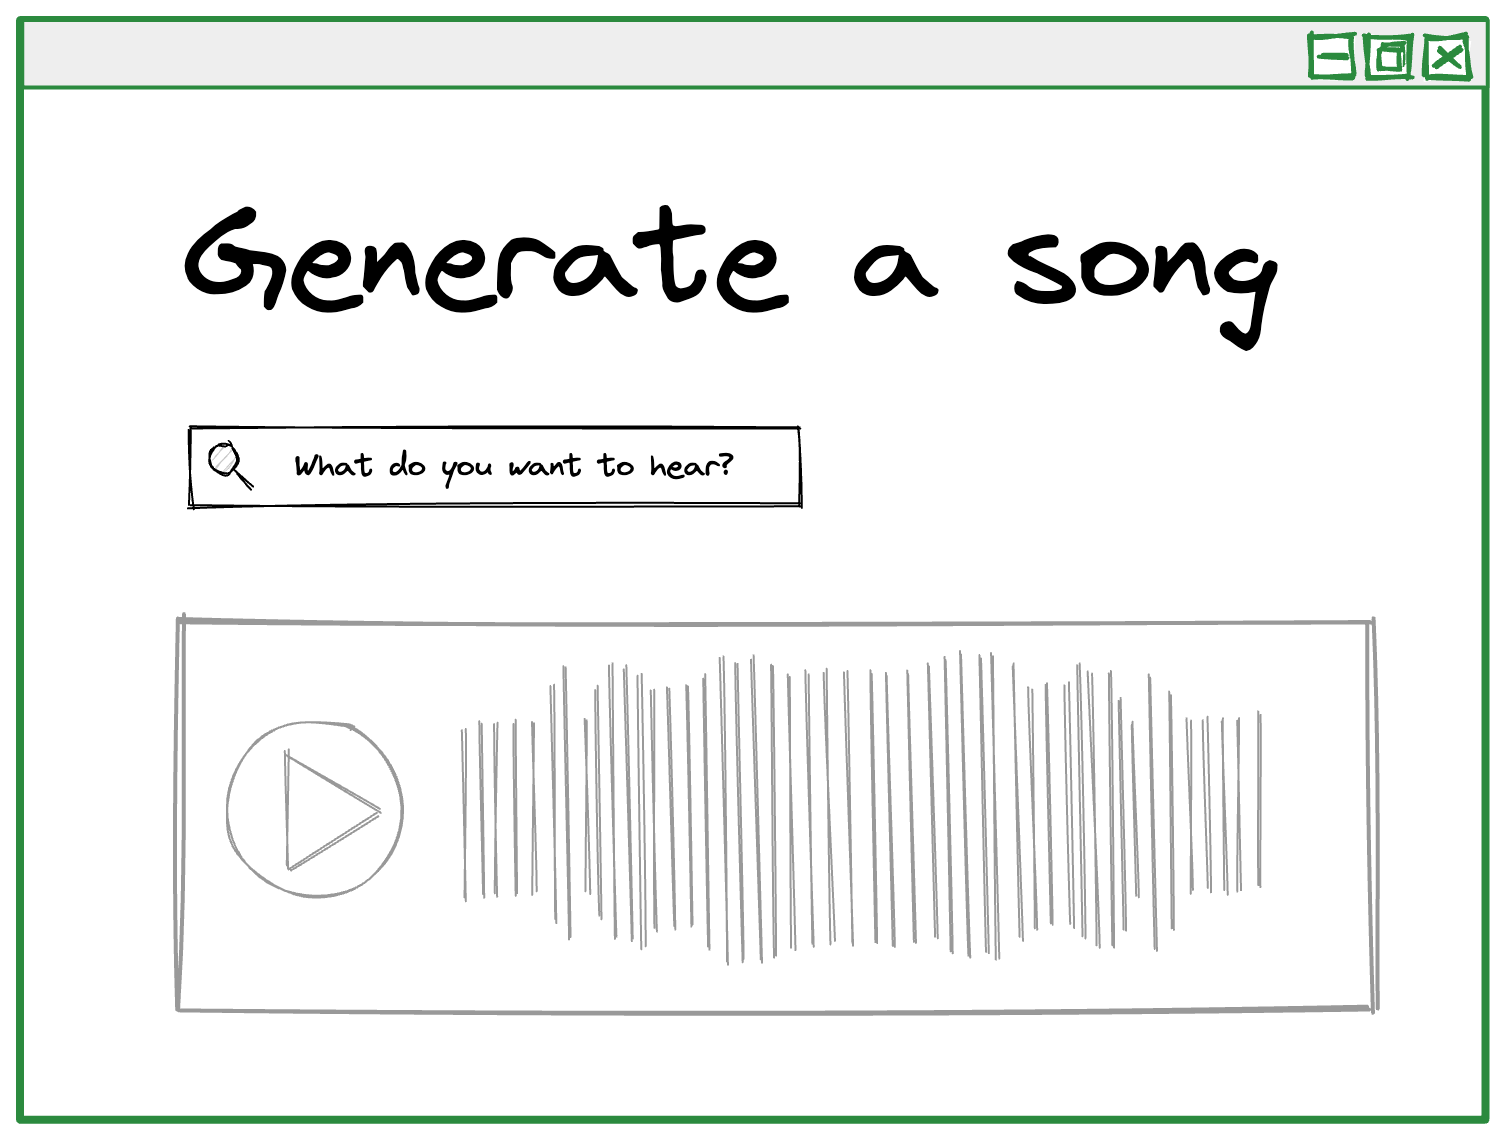 sketch mockup of a user interface titled “Generate a song” with a text input box asking “what do you want to hear?” followed by a grayed out and inactive play button and audio waveform.